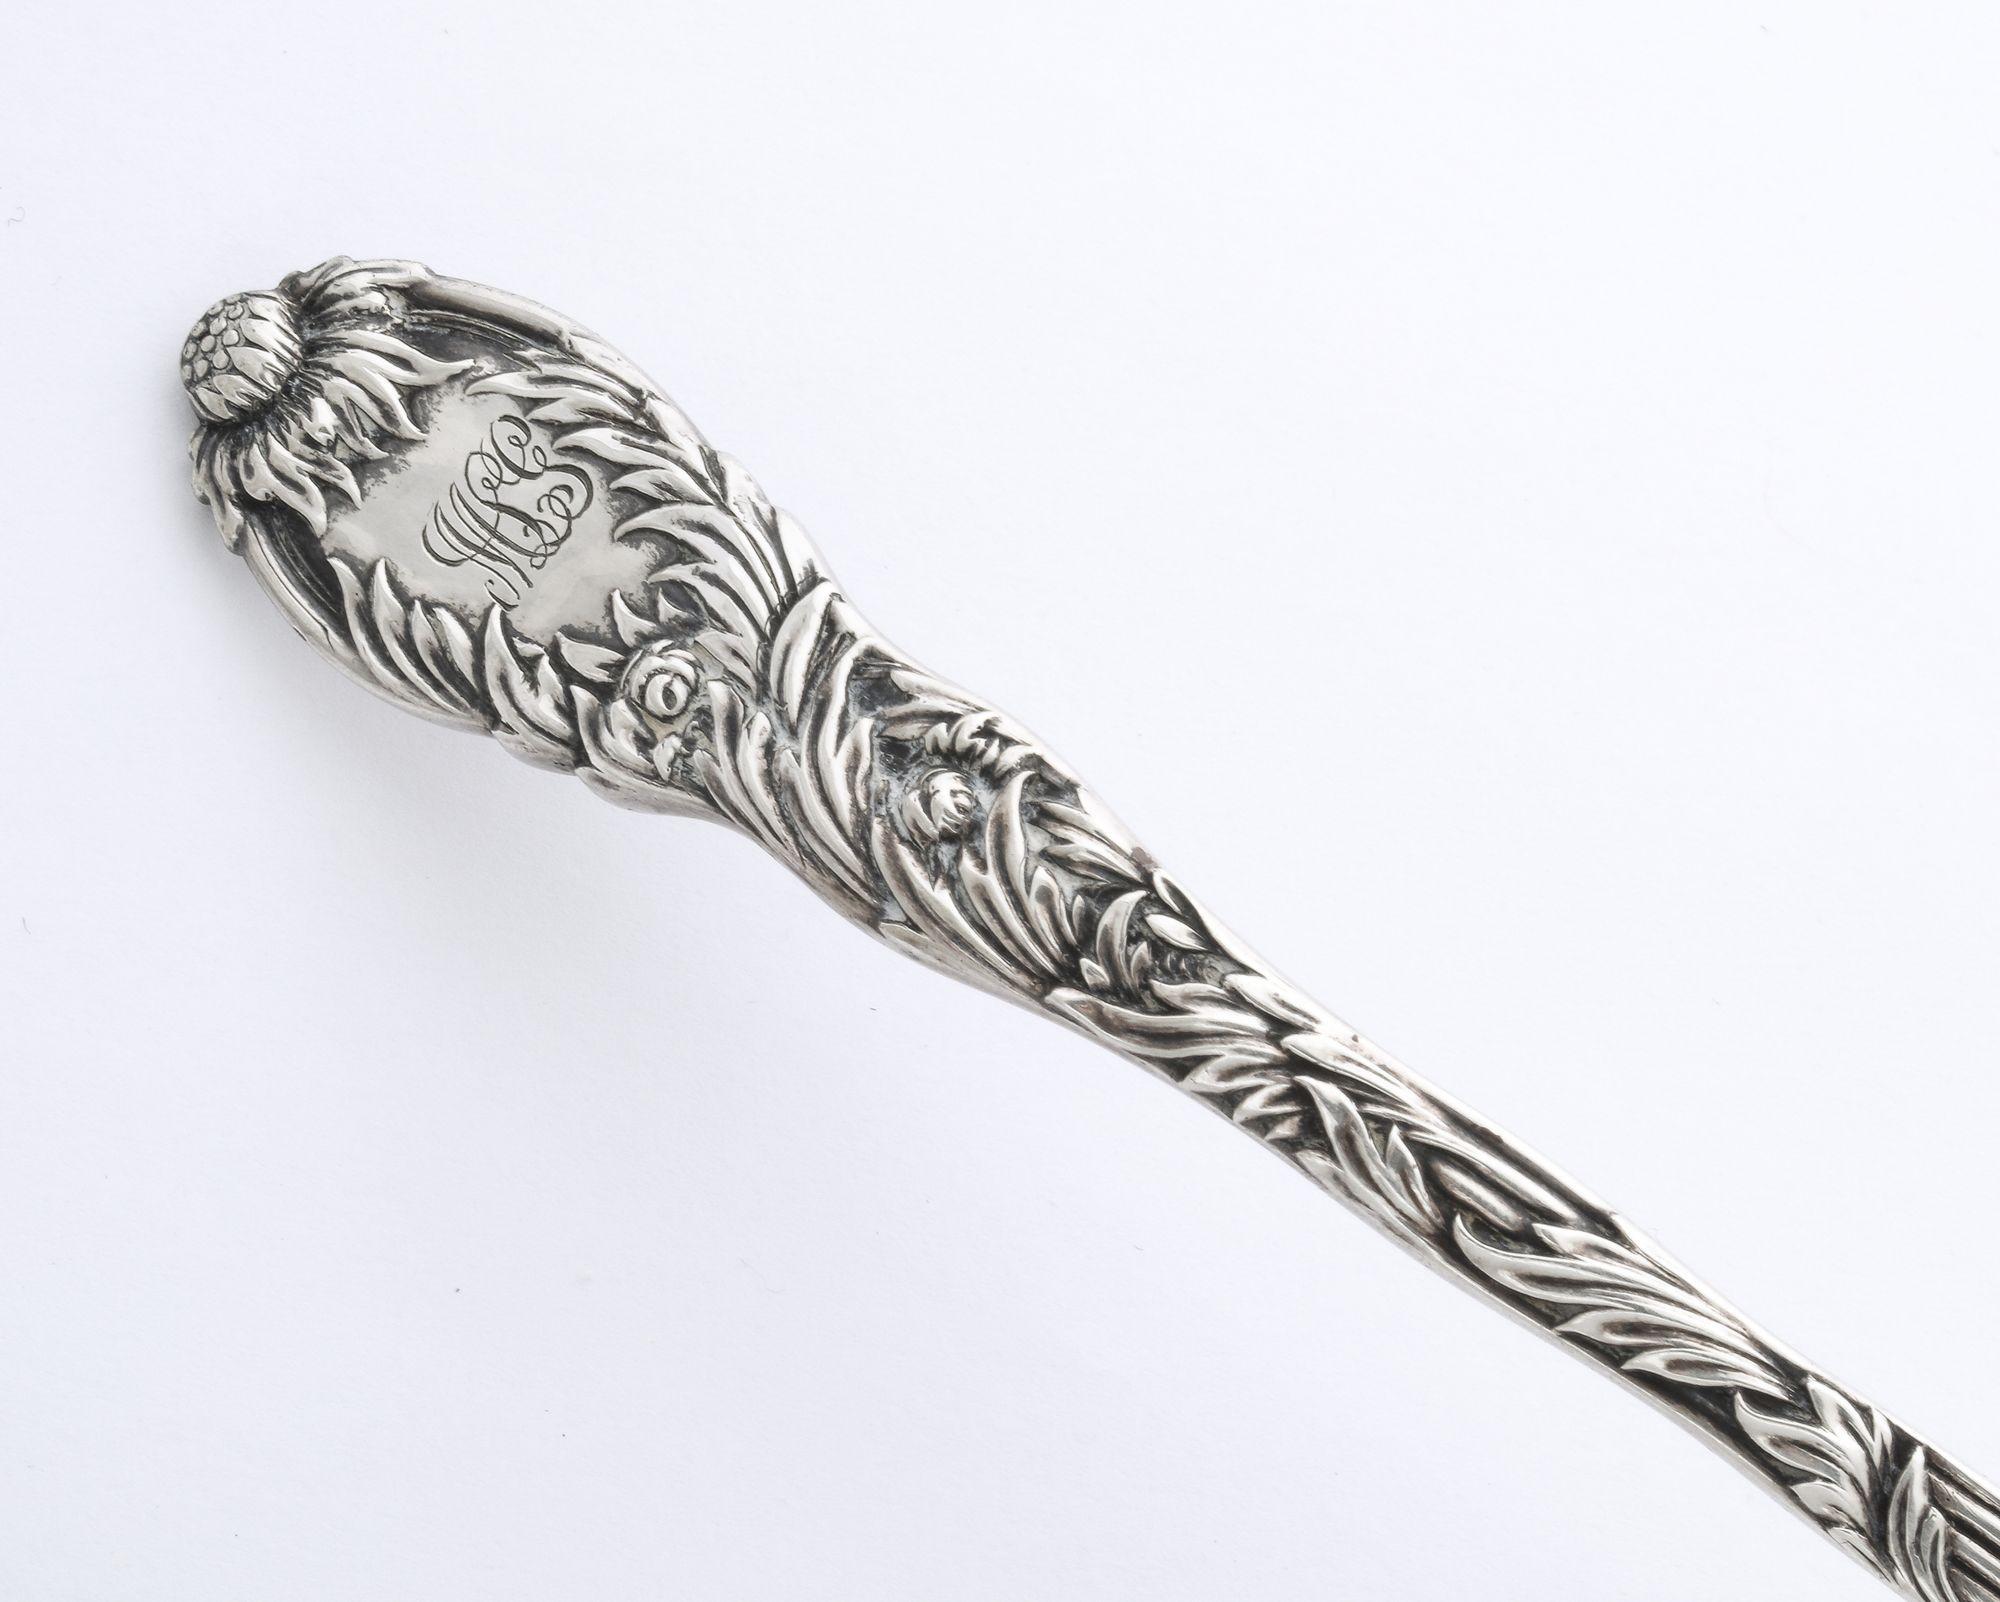 A wonderful sterling silver claret ladle Chrysanthemum (circa 1880) Tiffany's luxurious Chrysanthemum silver was designed in 1880 by Charles Grosjean. With its flowing curves, swirling vegetation, meandering tendrils, and blossoming flowers